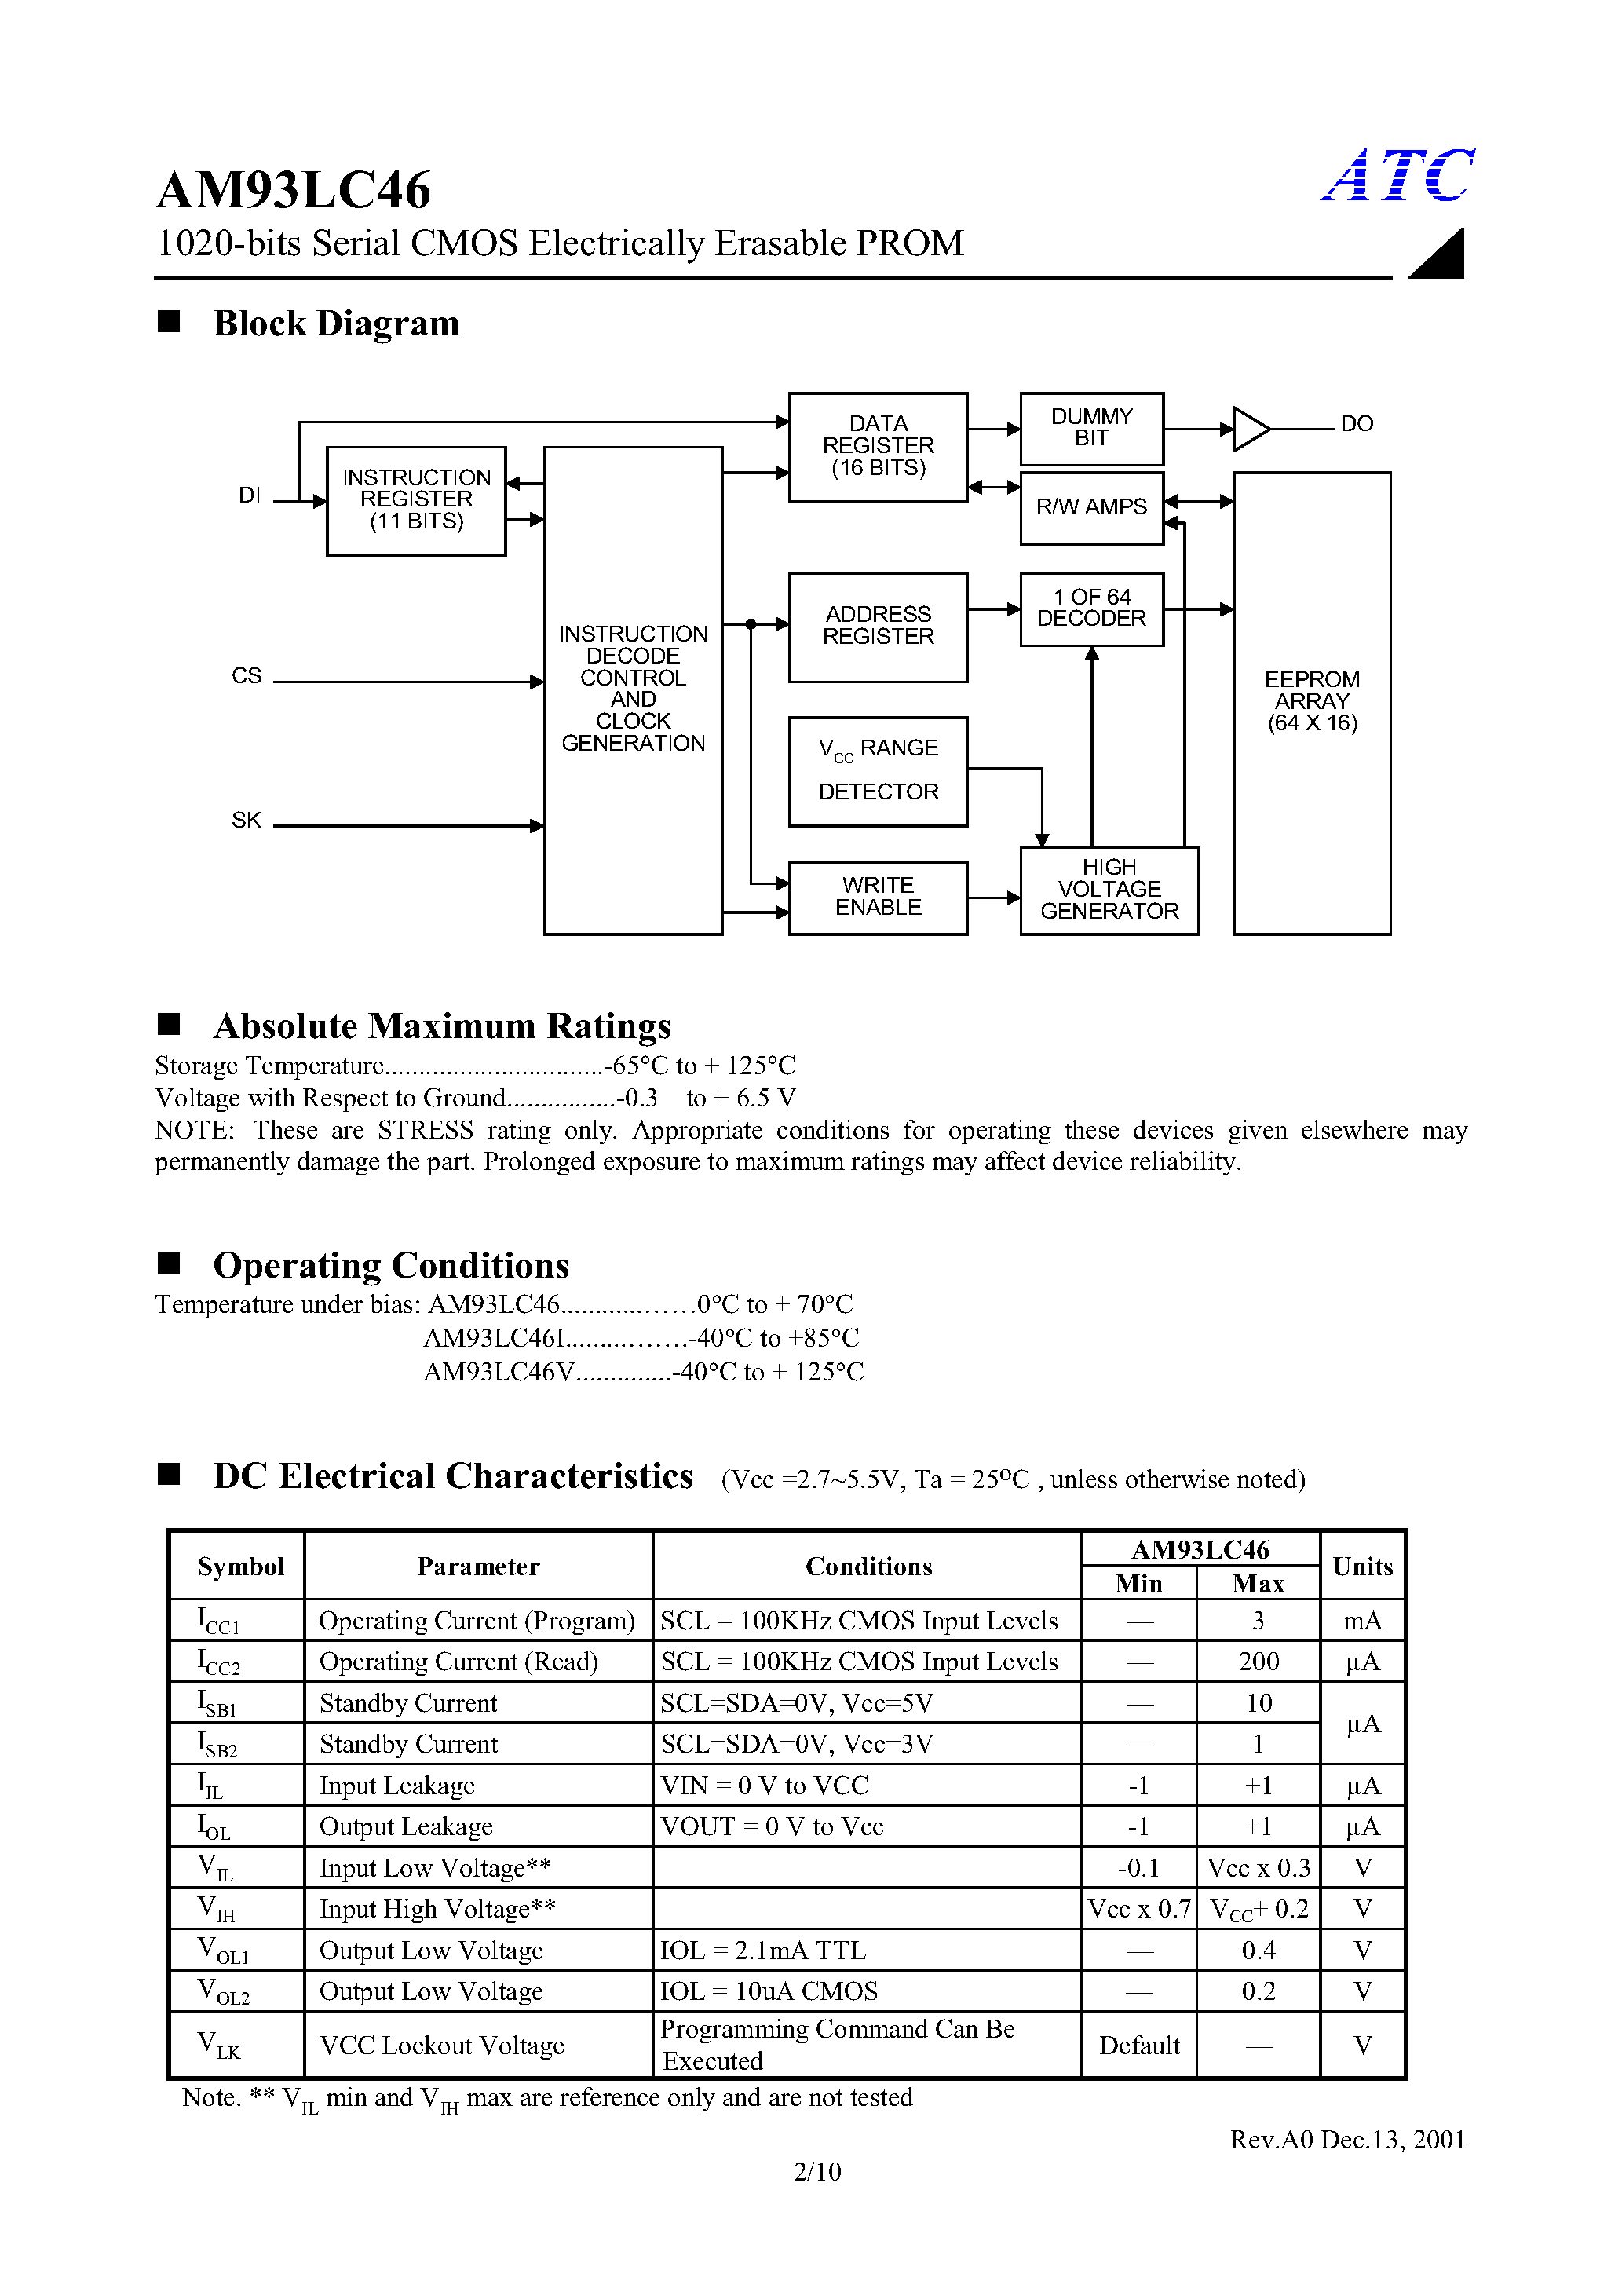 Datasheet AM93LC46S8A - 1024-bits Serial Electrically Erasable PROM page 2